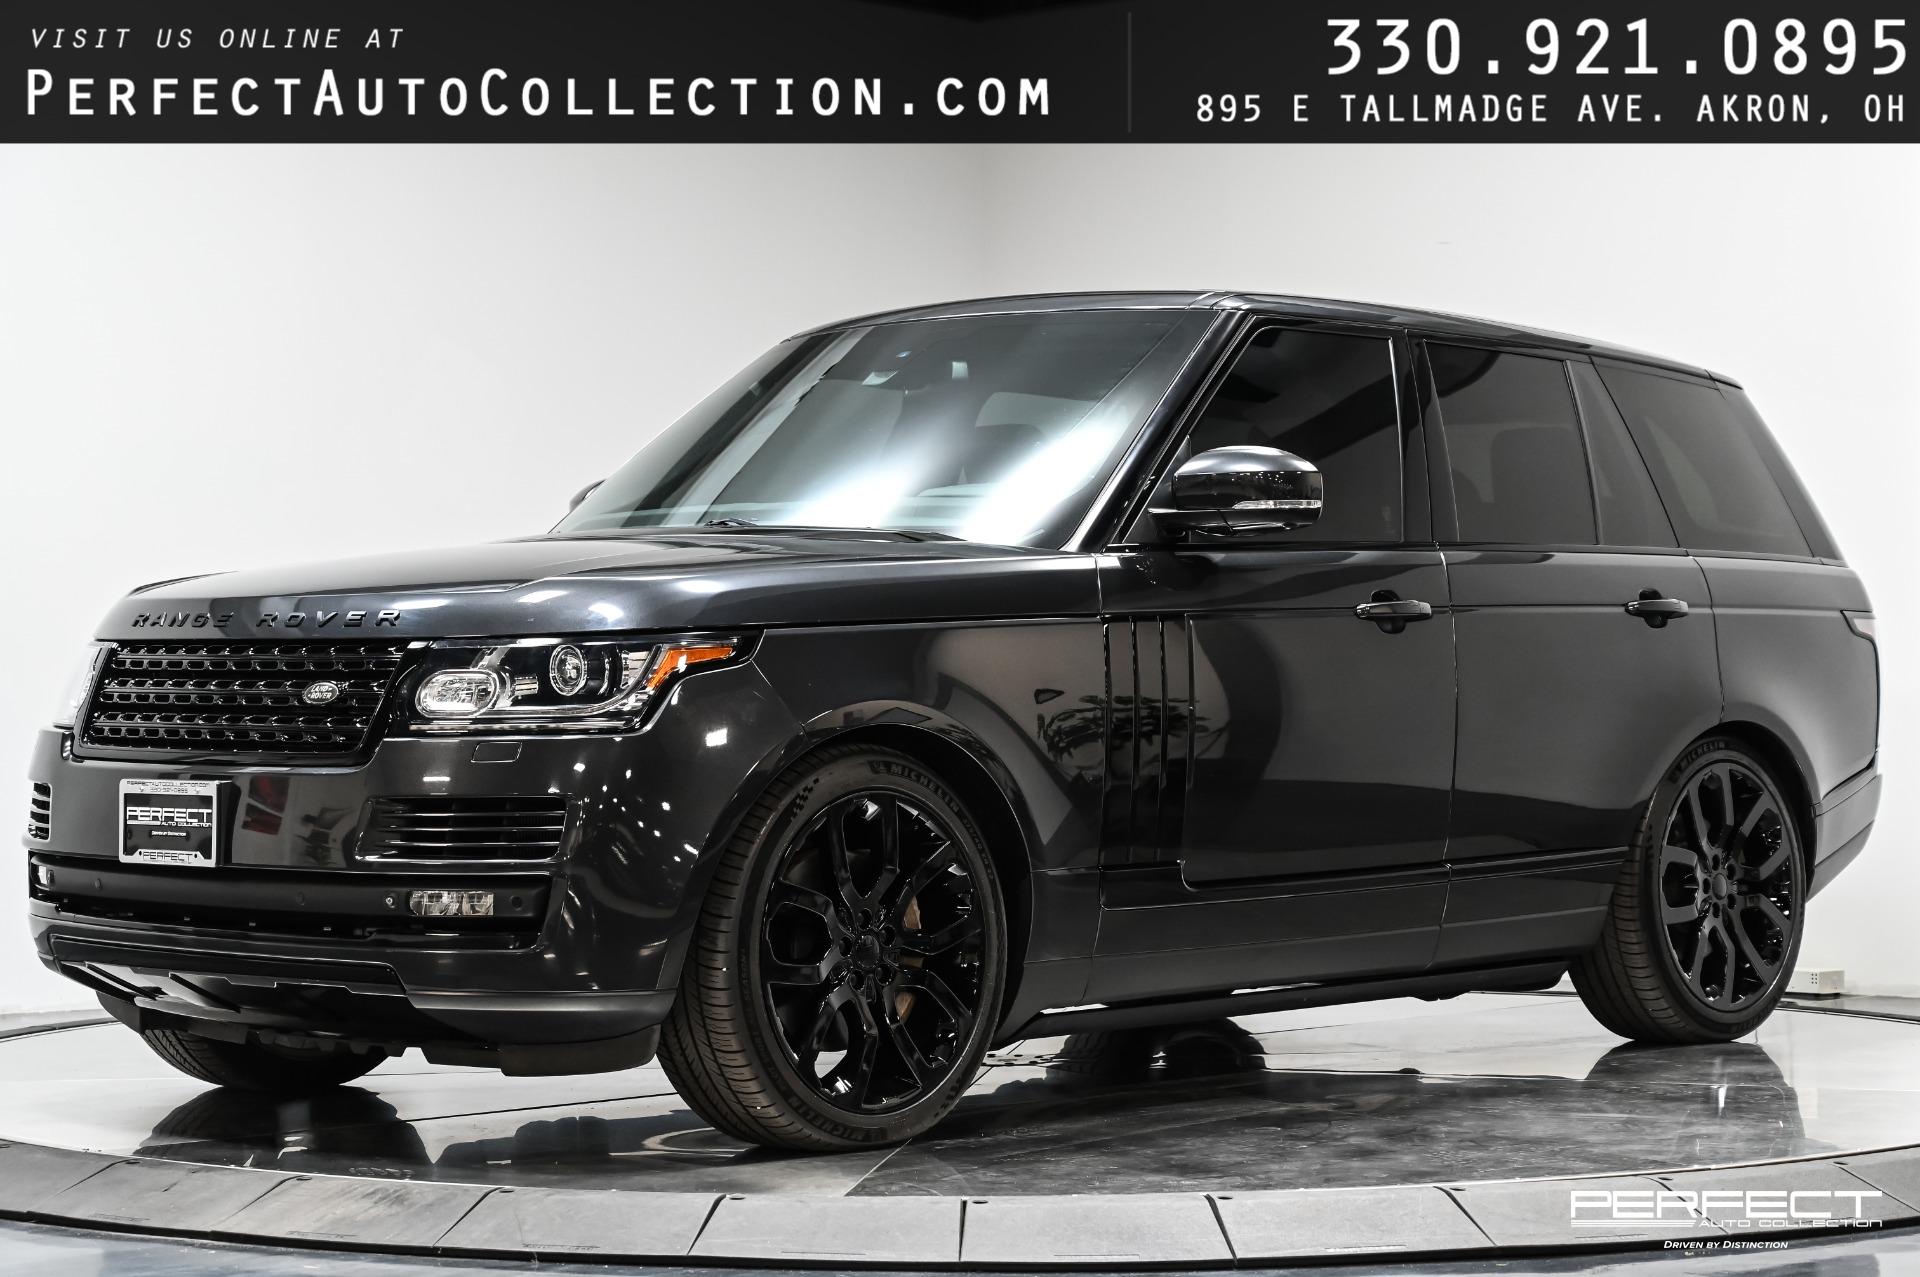 Used 2014 Land Rover Rover 5.0L Supercharged For (Sold) | Perfect Auto Collection Stock